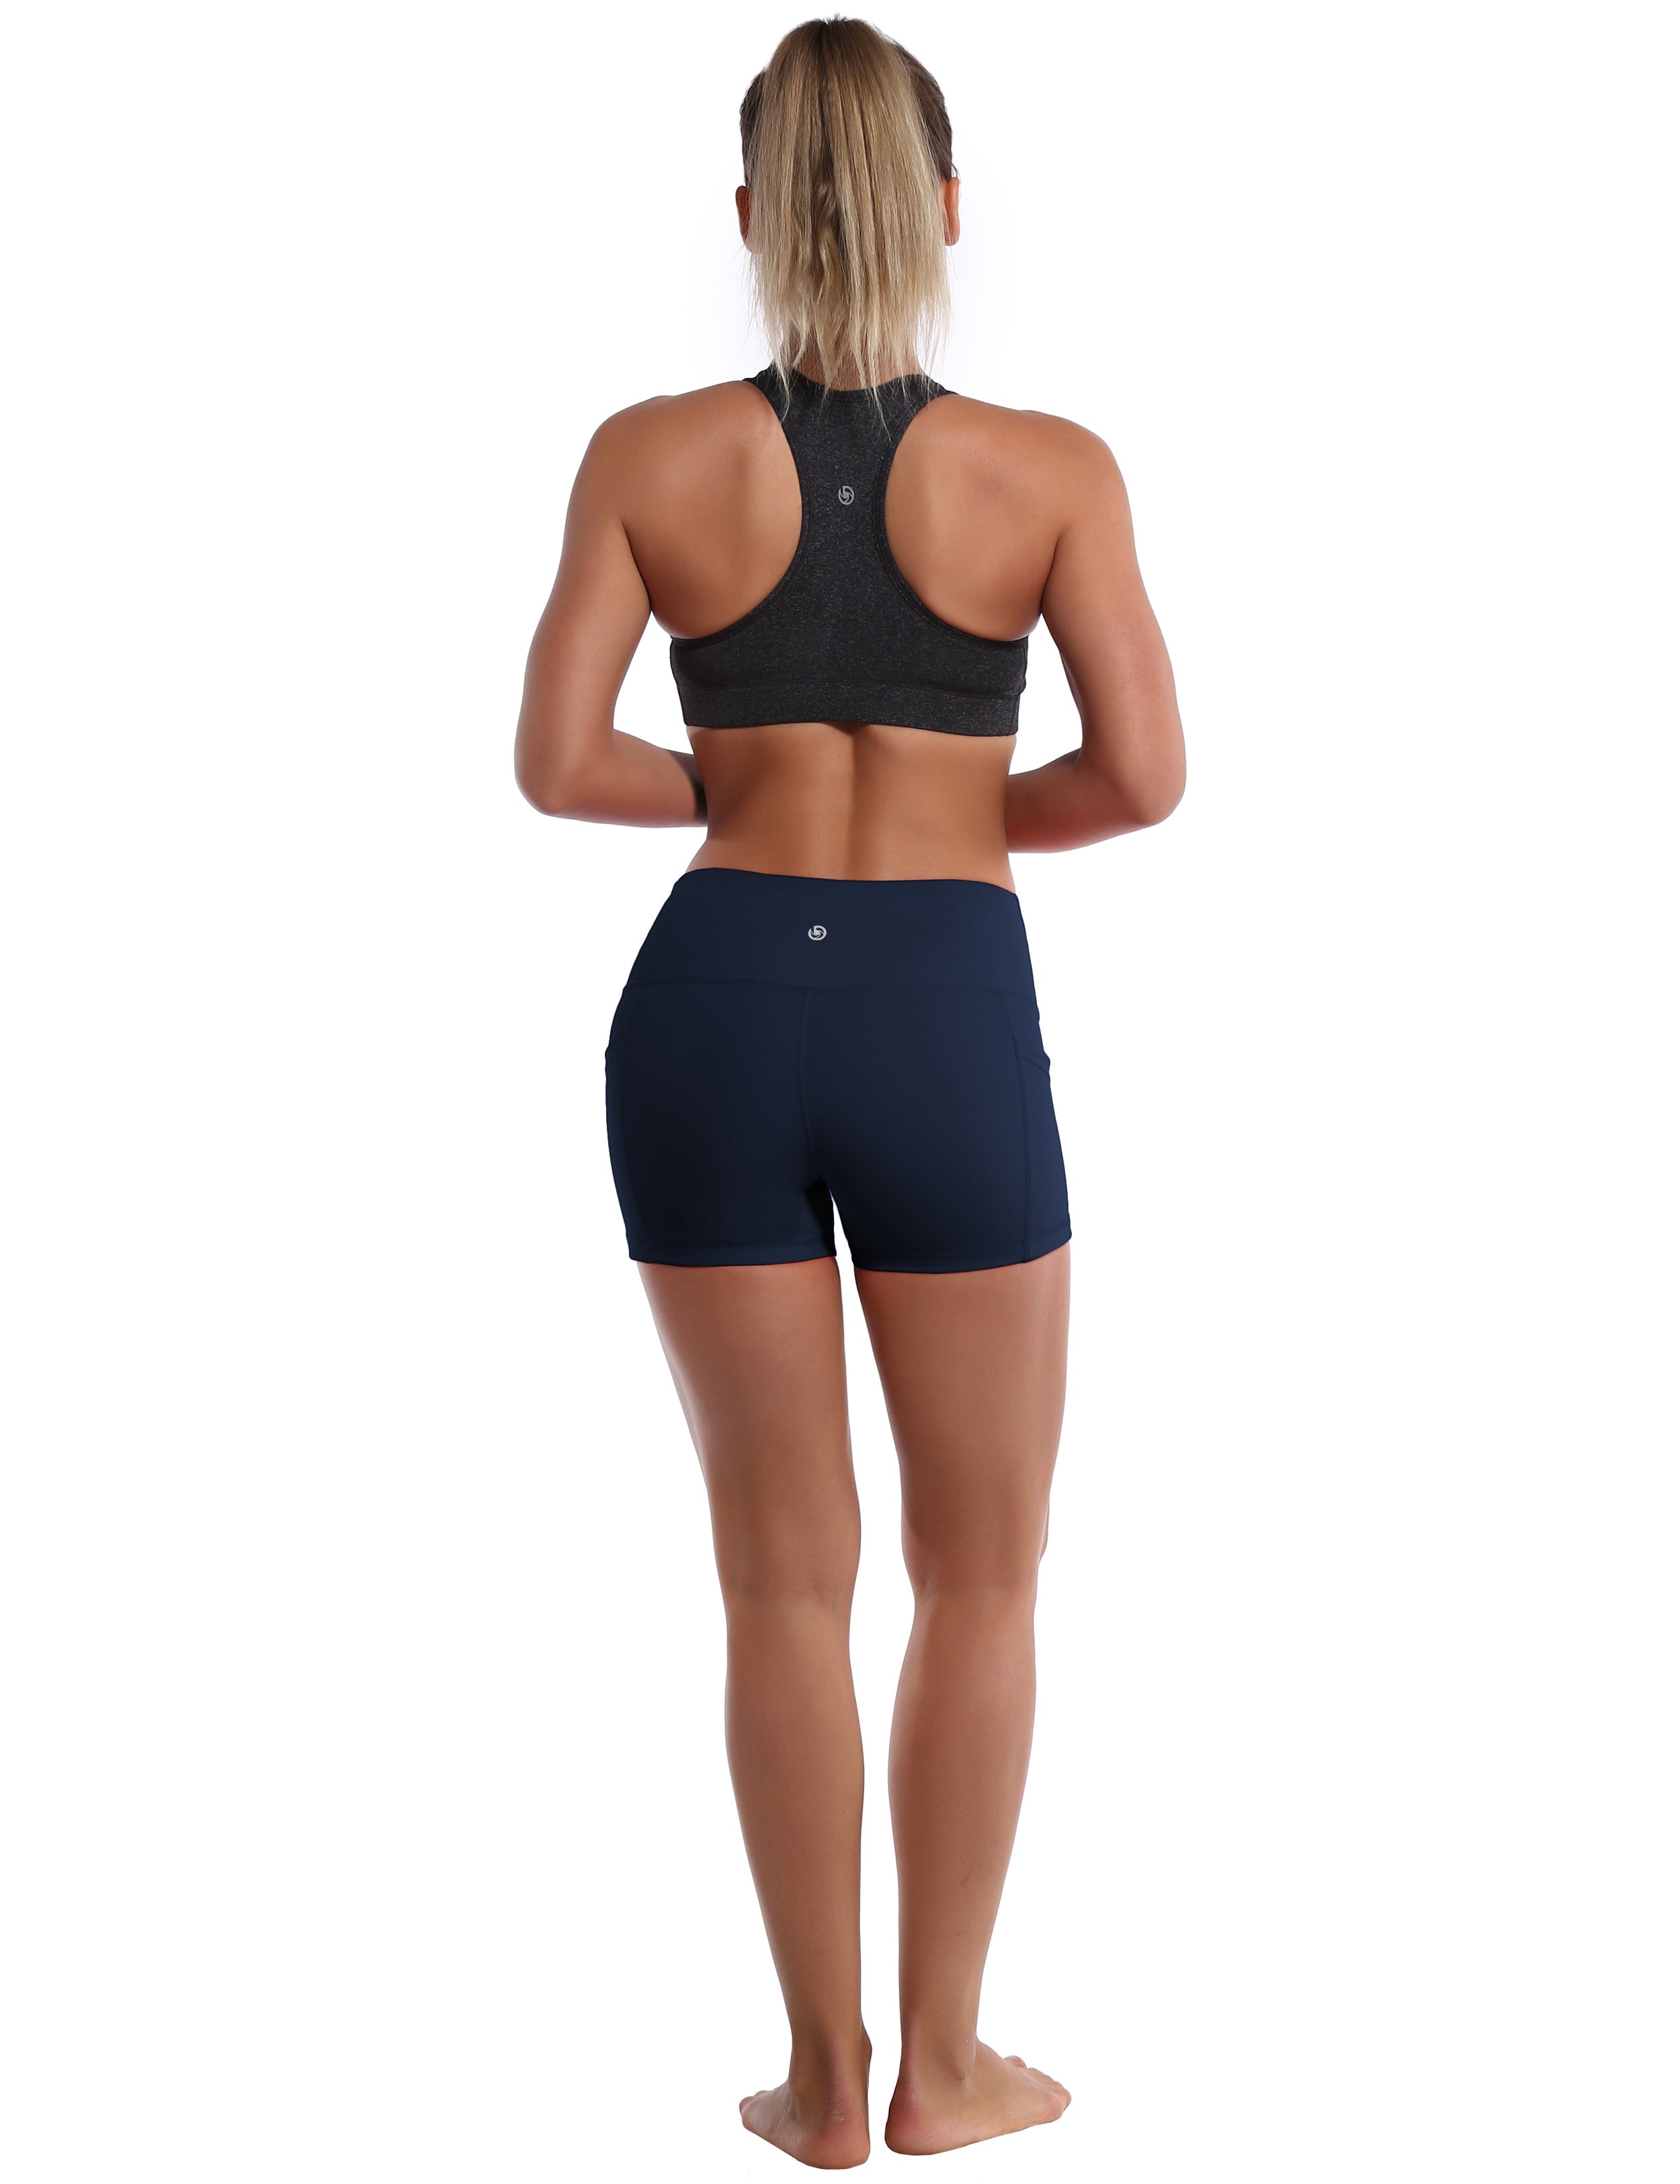 2.5" Side Pockets Pilates Shorts darknavy Sleek, soft, smooth and totally comfortable: our newest sexy style is here. Softest-ever fabric High elasticity High density 4-way stretch Fabric doesn't attract lint easily No see-through Moisture-wicking Machine wash 78% Polyester, 22% Spandex